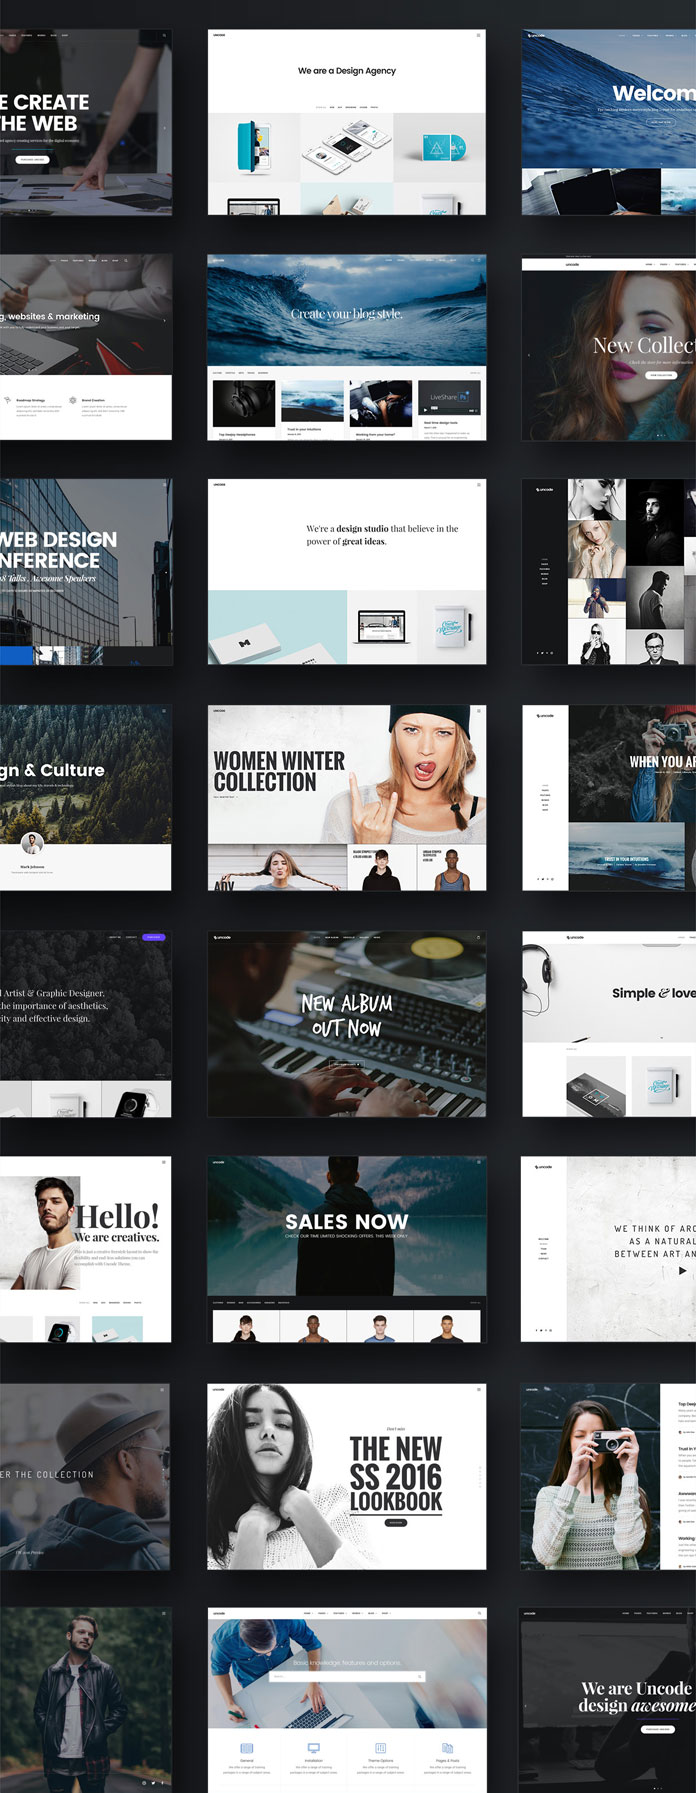 The Uncode WordPress theme comes with over 30 premade concepts for any need.